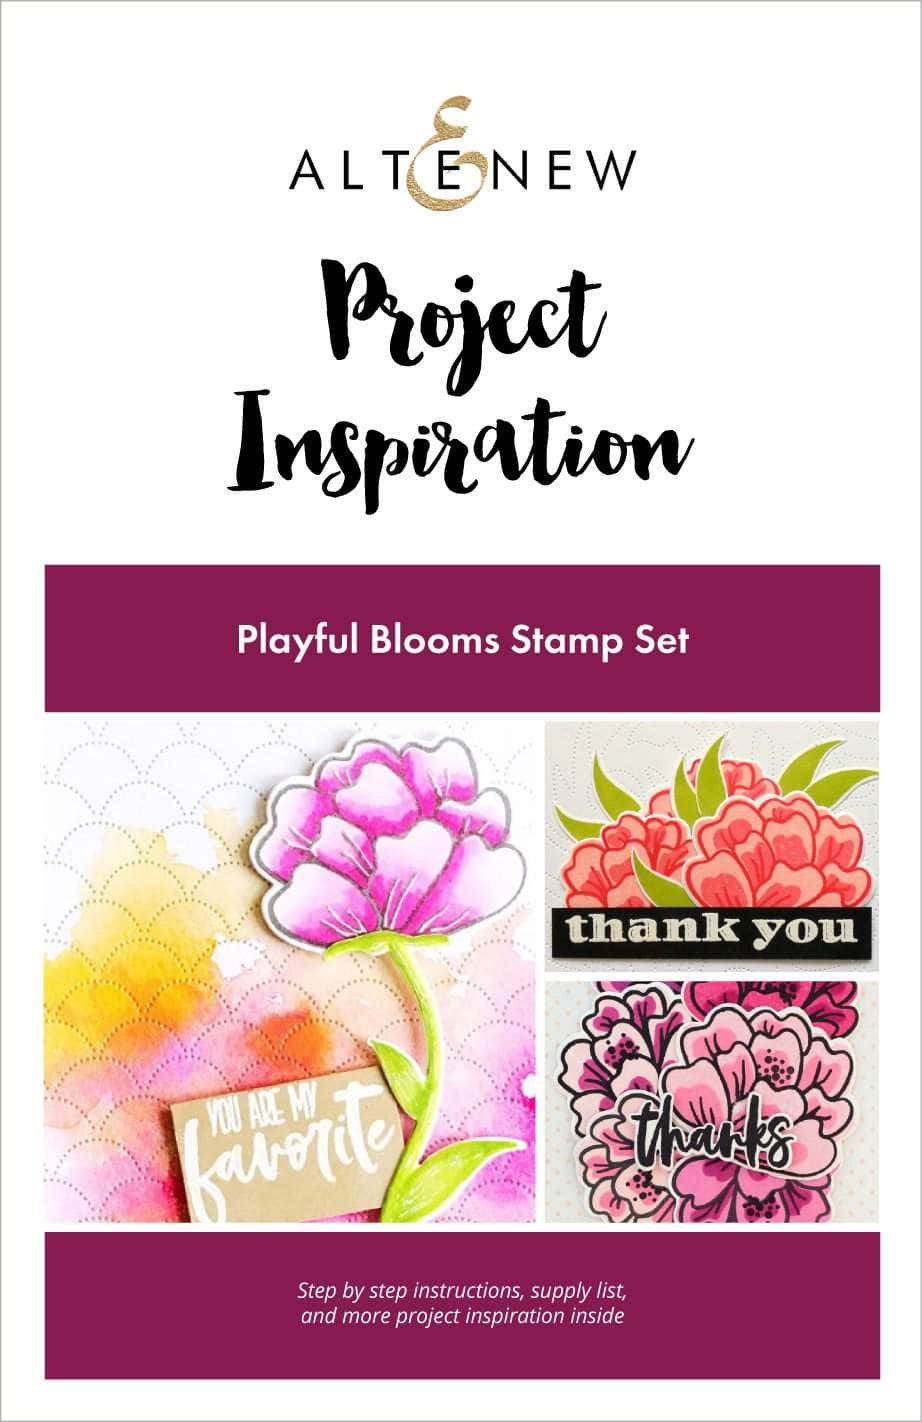 55Printing.com Printed Media Playful Blooms Project Inspiration Guide